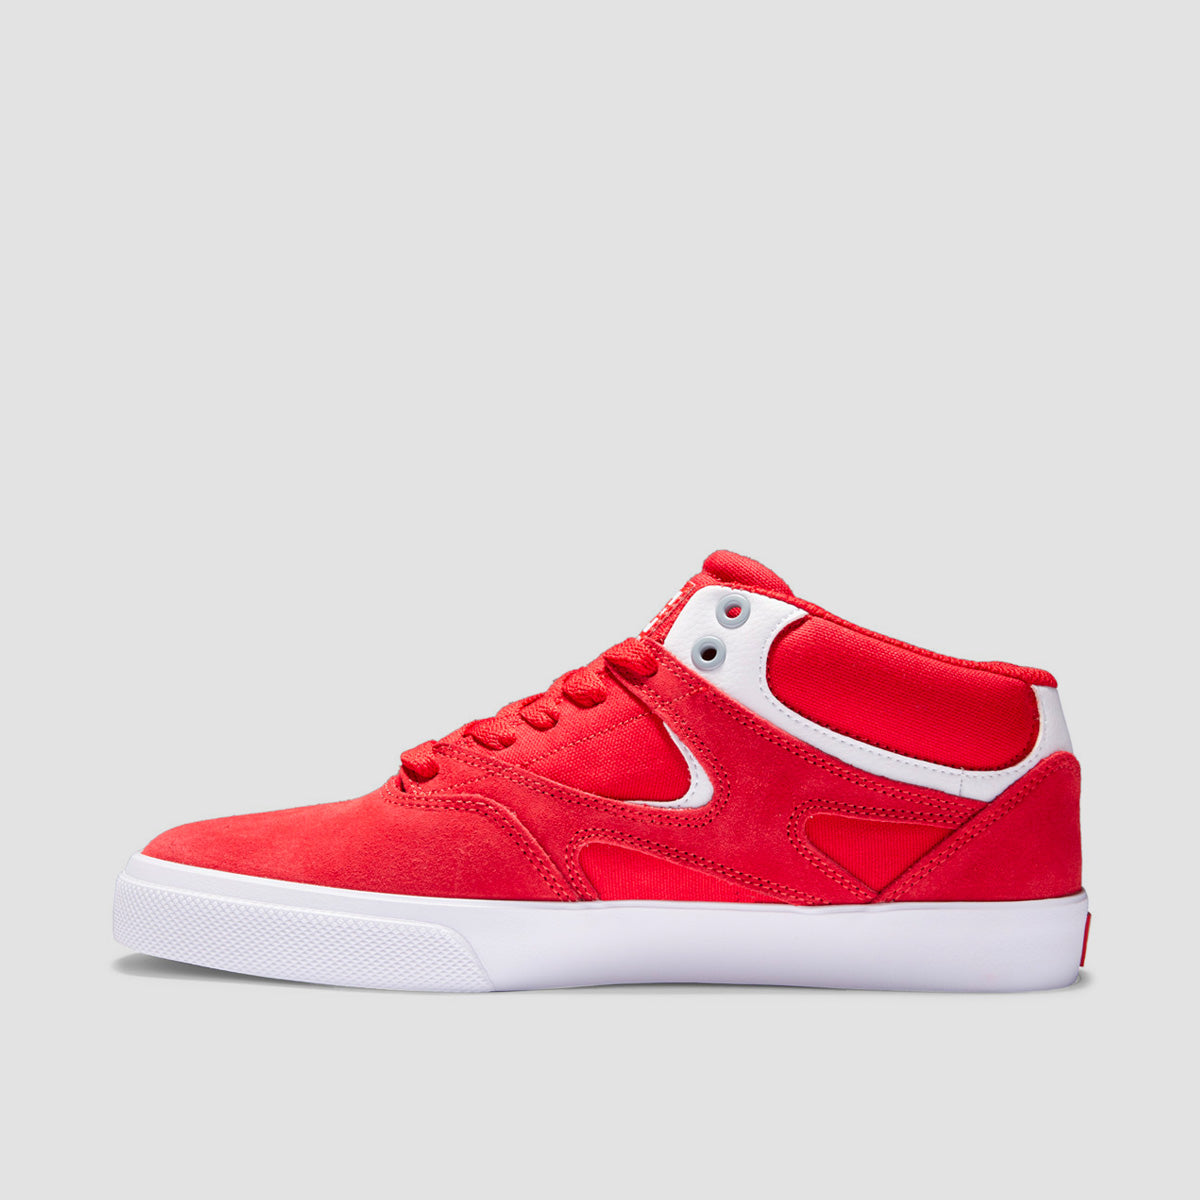 DC Kalis Vulc Mid S Shoes - Athletic Red